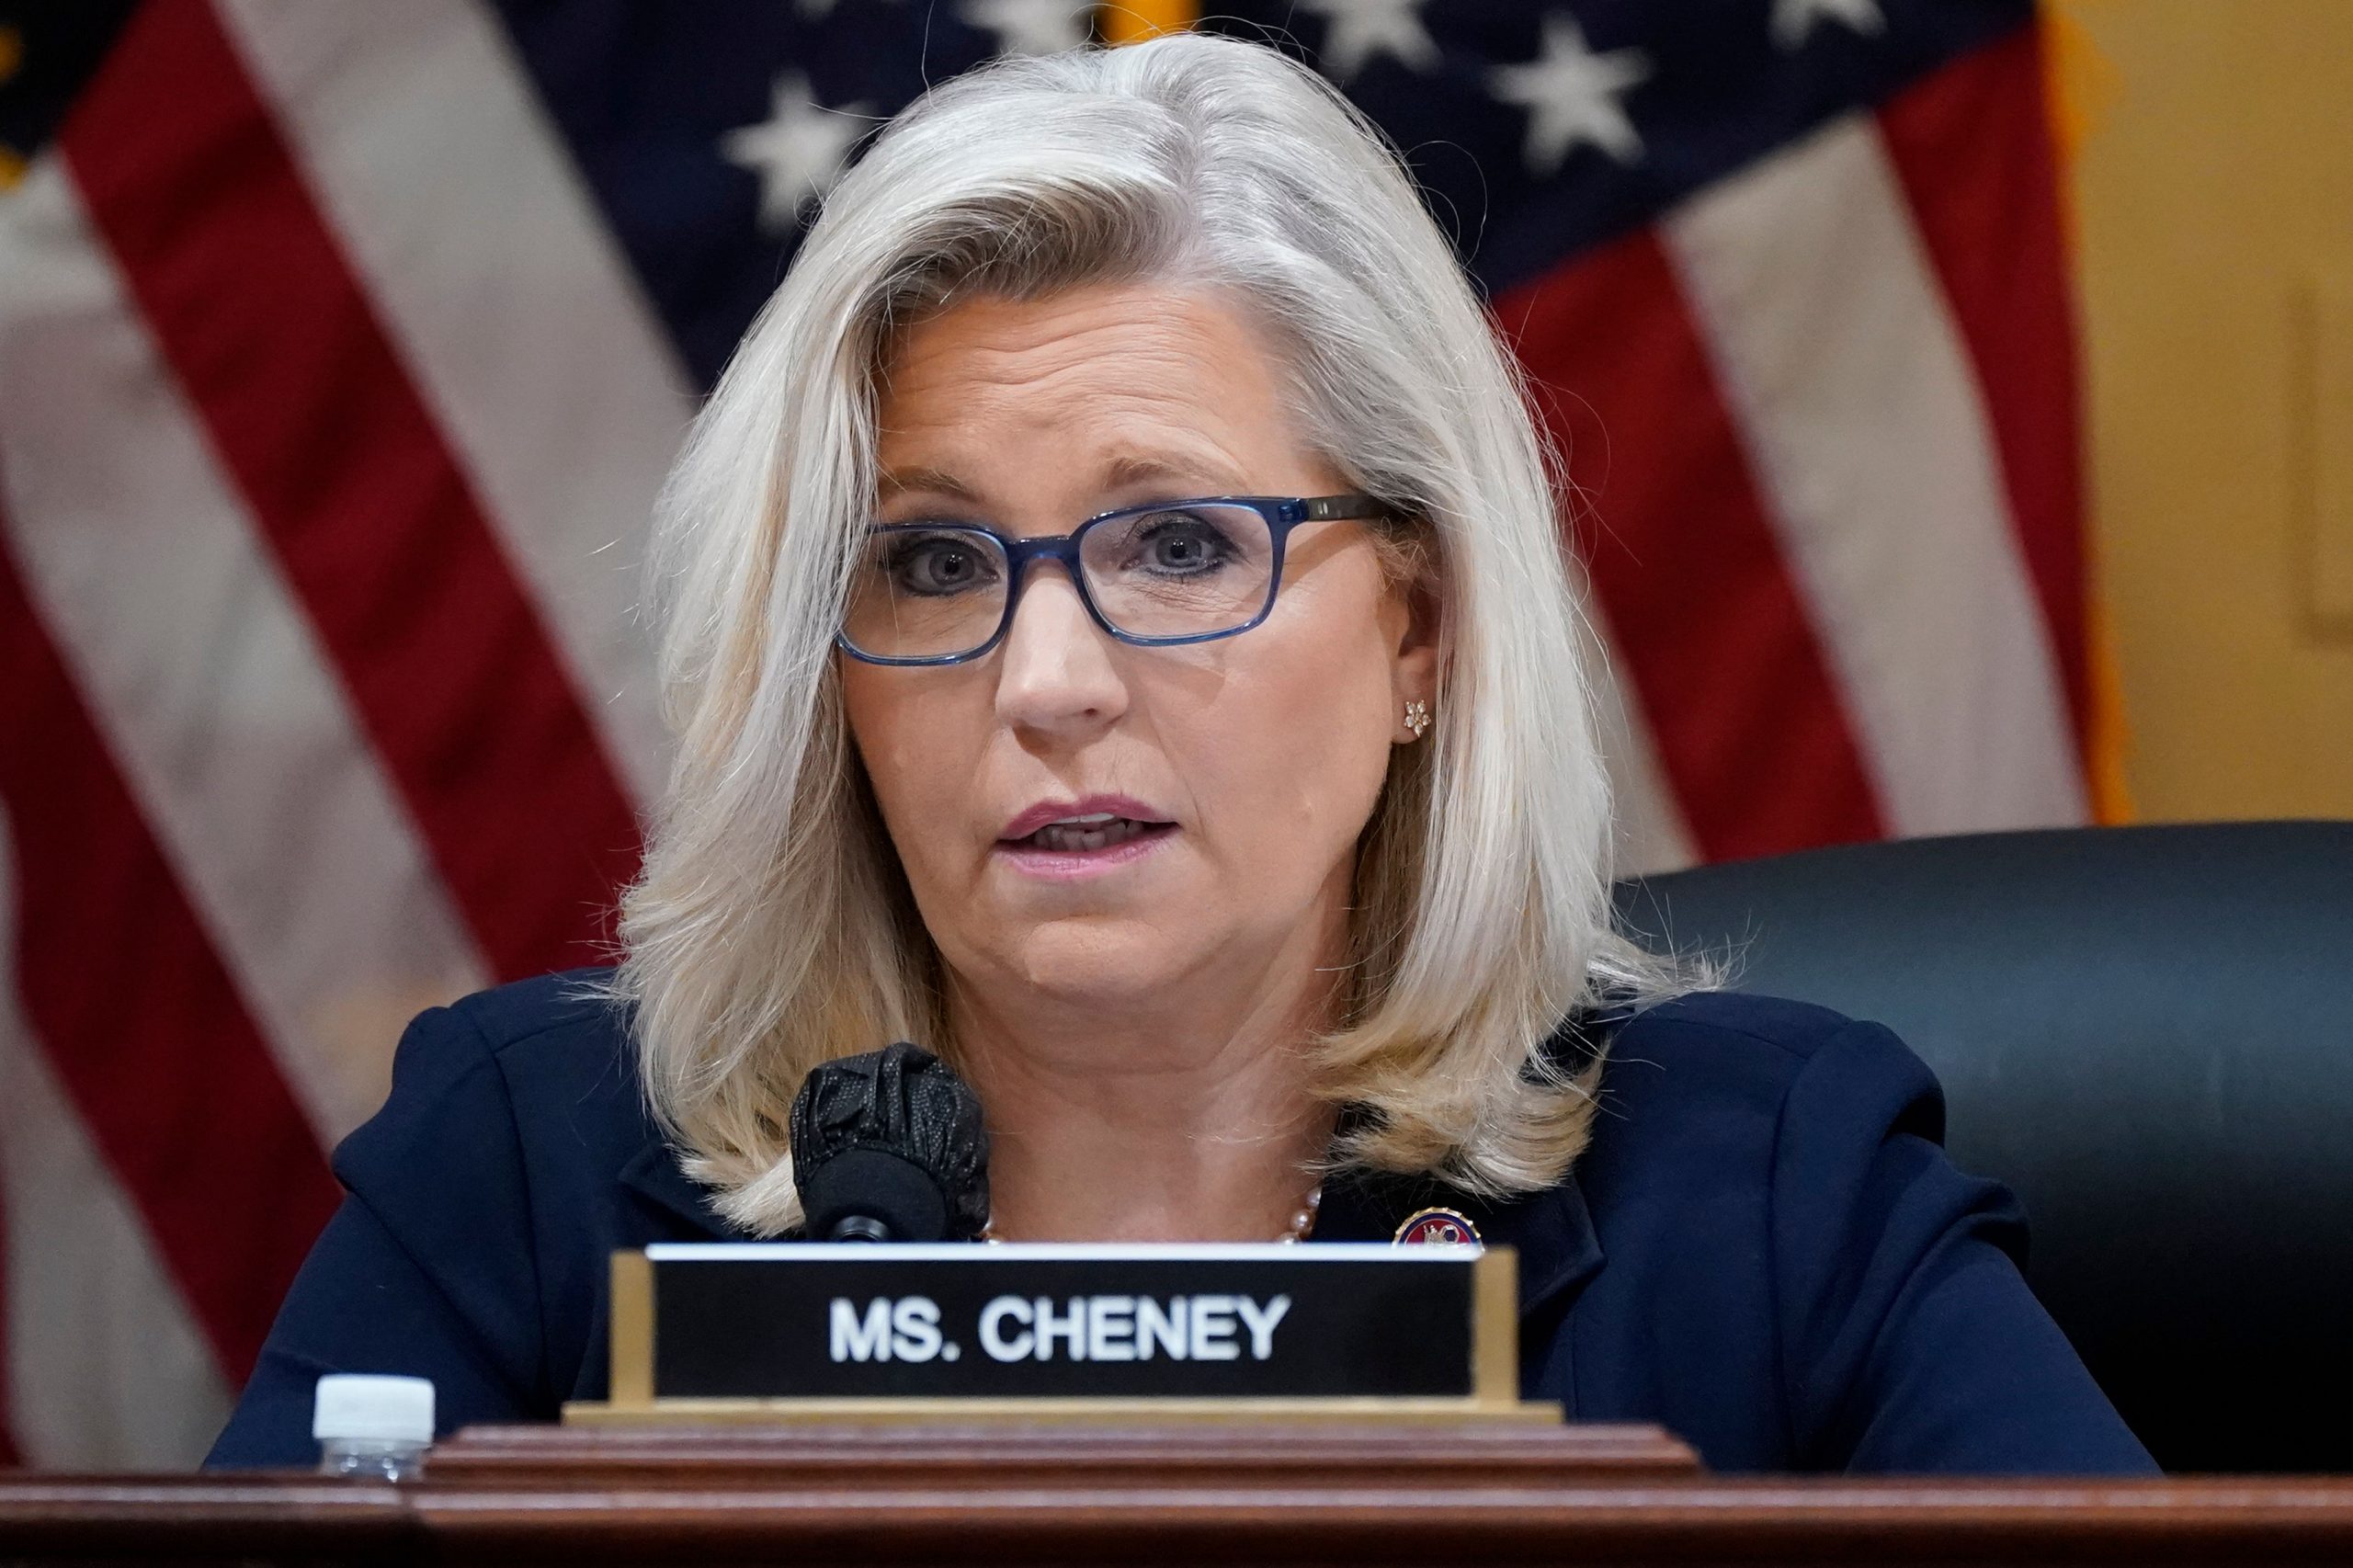 Liz Cheney likely to lose House seat: How other pro-impeachment Republican leaders performed in primaries